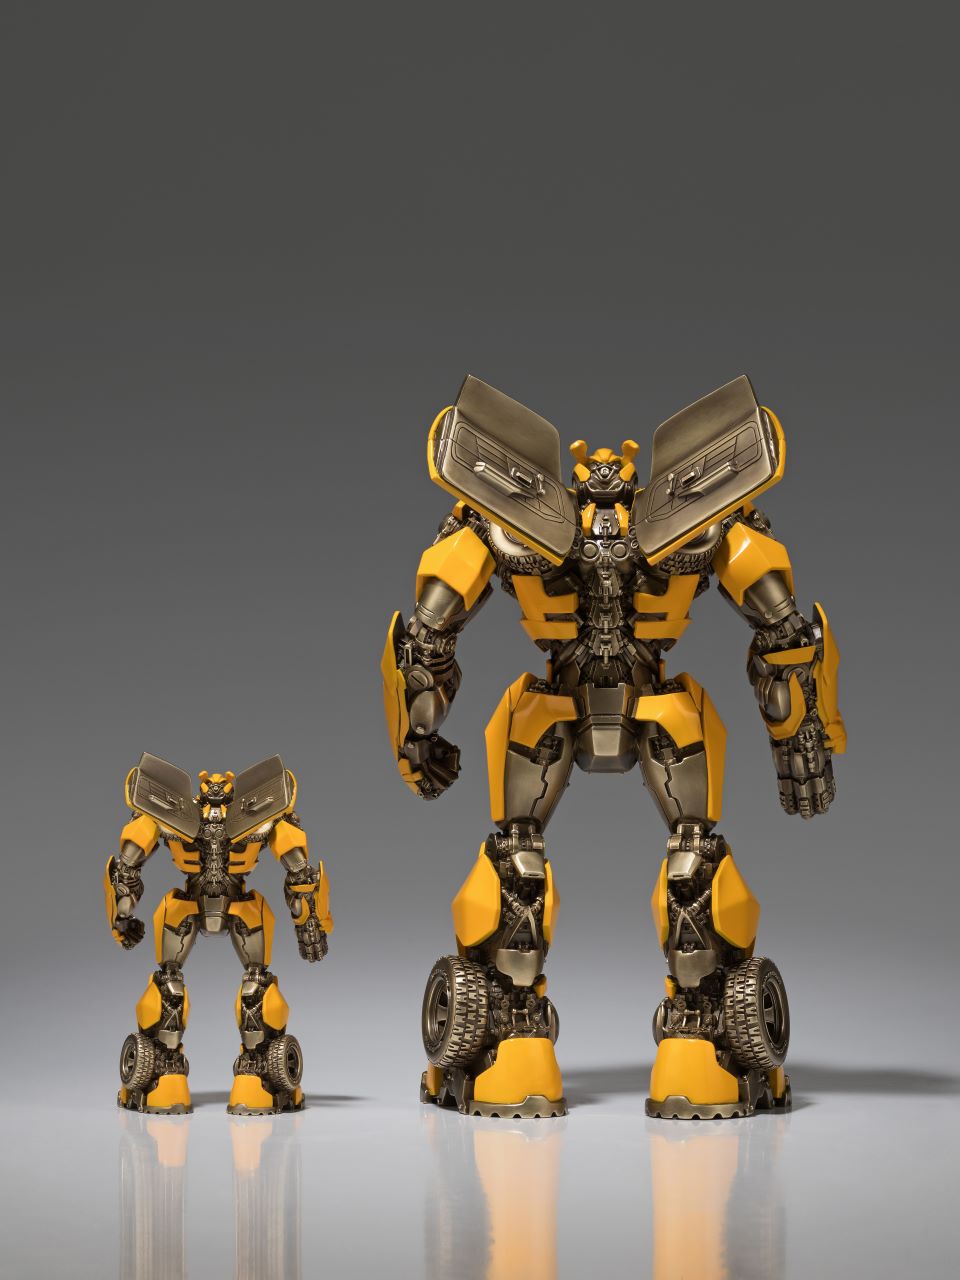 Transformers statues Sculpture: Bumblebee Classic Collectible, High end Toy, Home Decor, Colored brass Sculpture